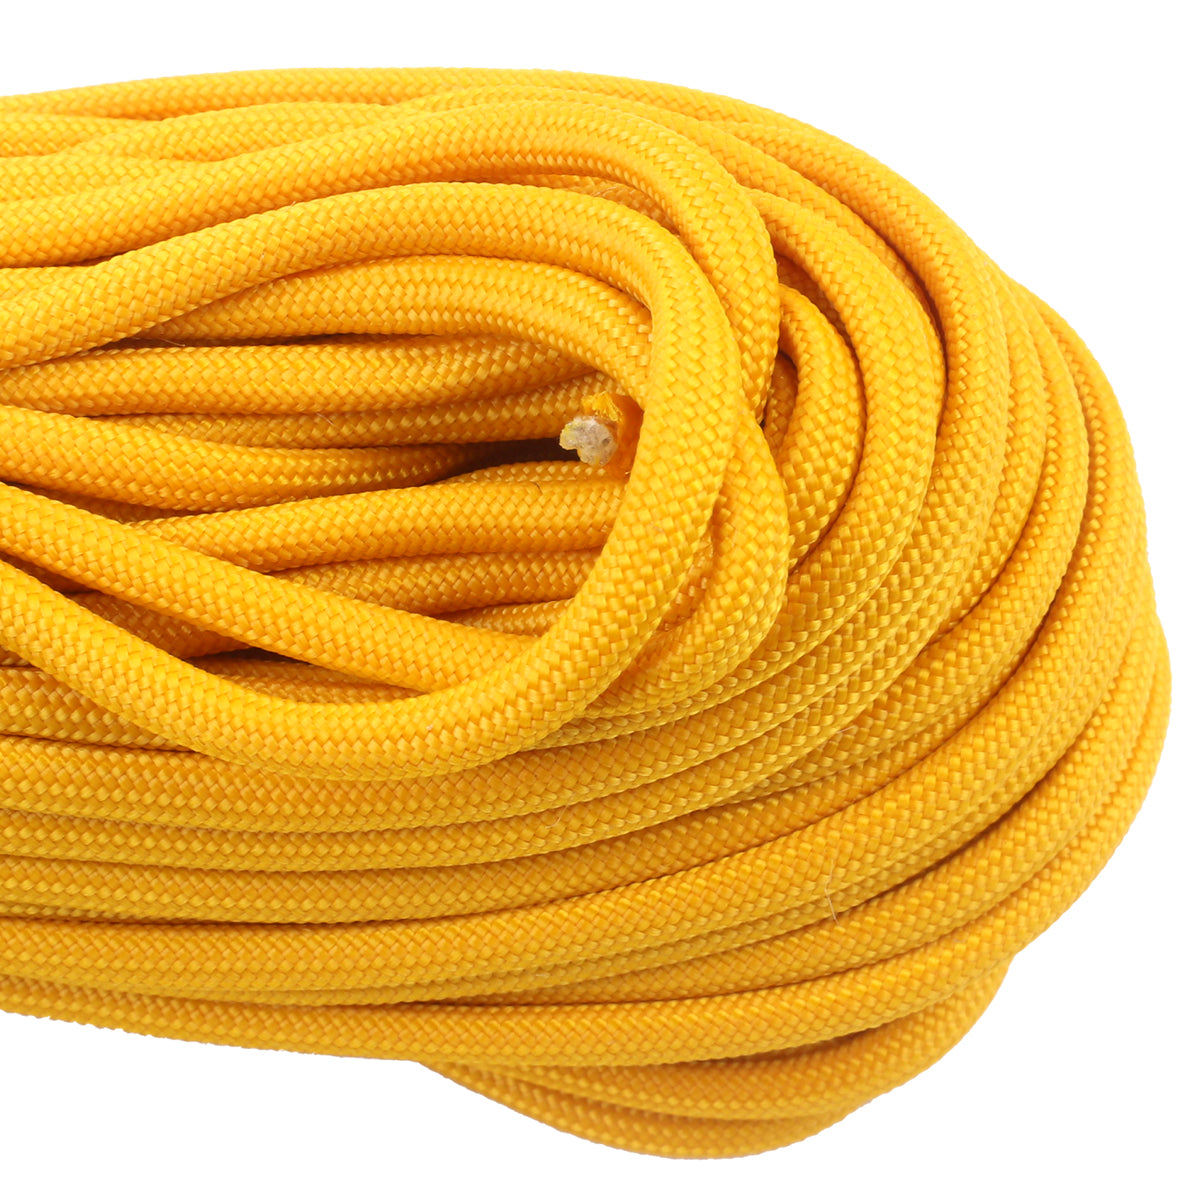 Goldenrod 550 Paracord Parachute Cord 100% Nylon 16ft. Made in America 